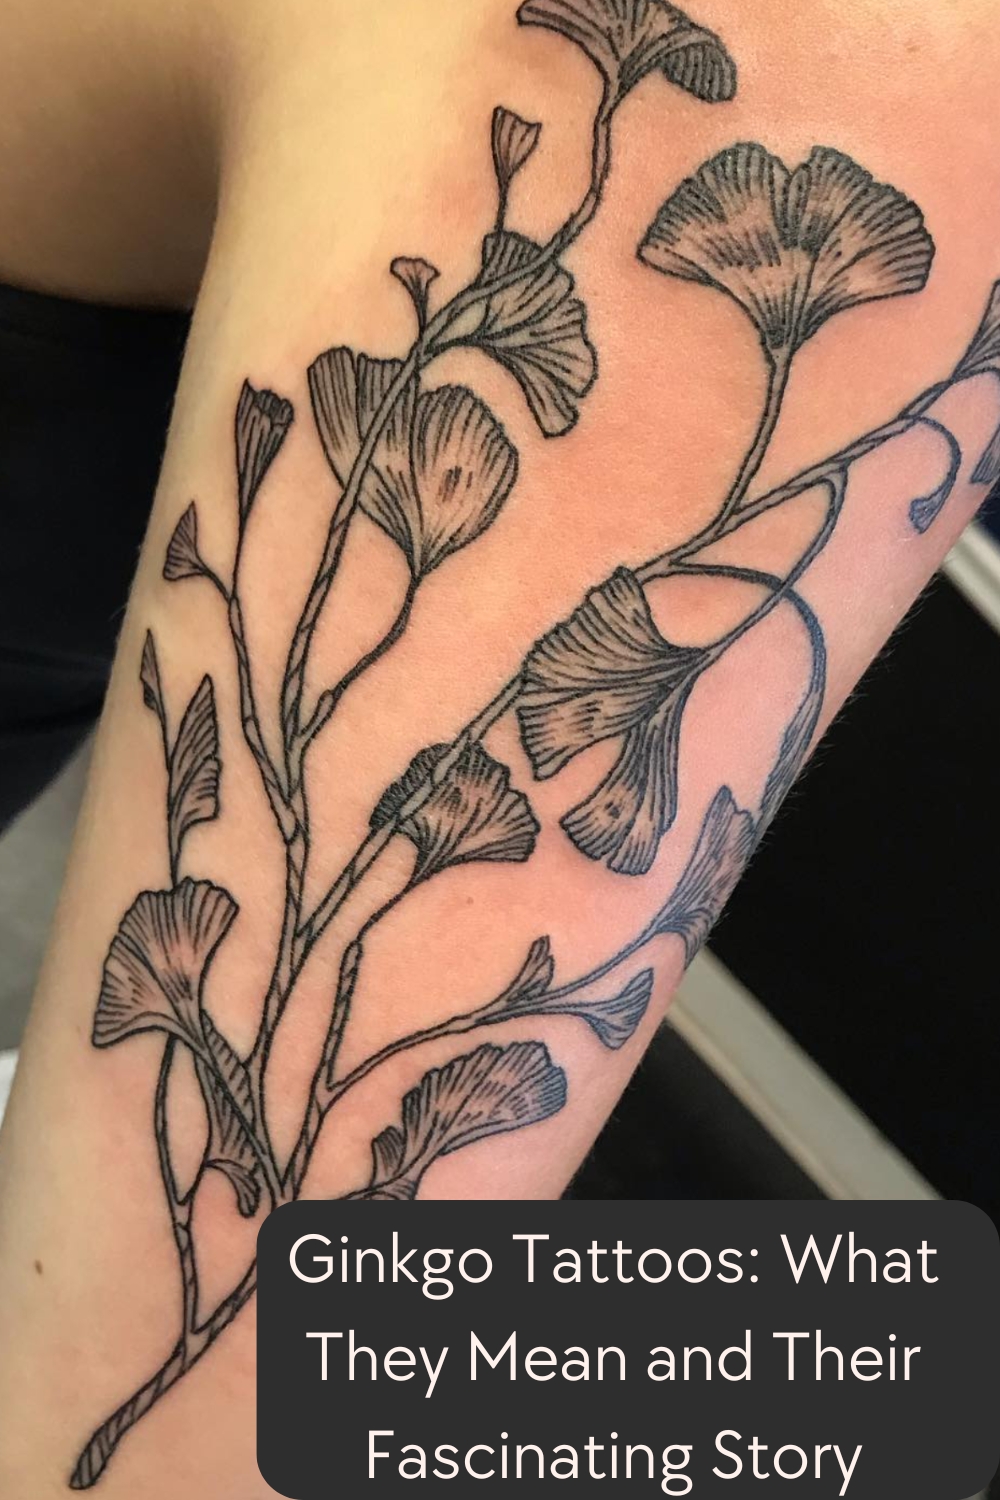 Ginkgo Tattoos What They Mean and Their Fascinating Story - Tattoo Strategies